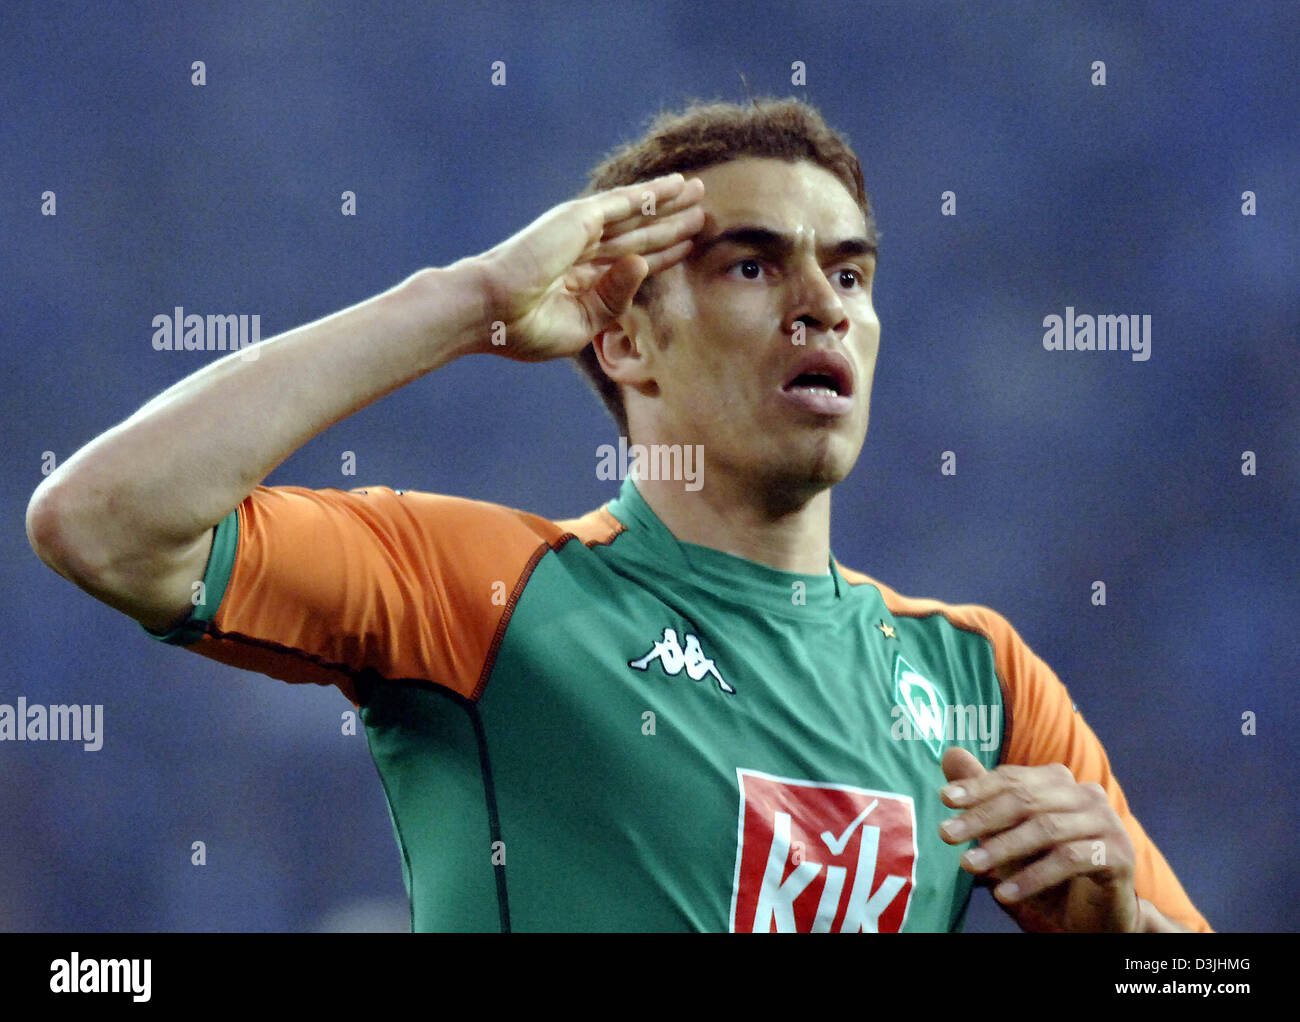 (dpa) - Werder Bremen's defender Valerien Ismael (L) salutes to the fans celebrating his 1-1 goal against FC Schalke 04 during the German domestic DFB cup semi-final match at the Arena Auf Schalke in Gelsenkirchen, Germany, 19 April 2005. Schalke won the match after extratime and penalties 7-6. Stock Photo